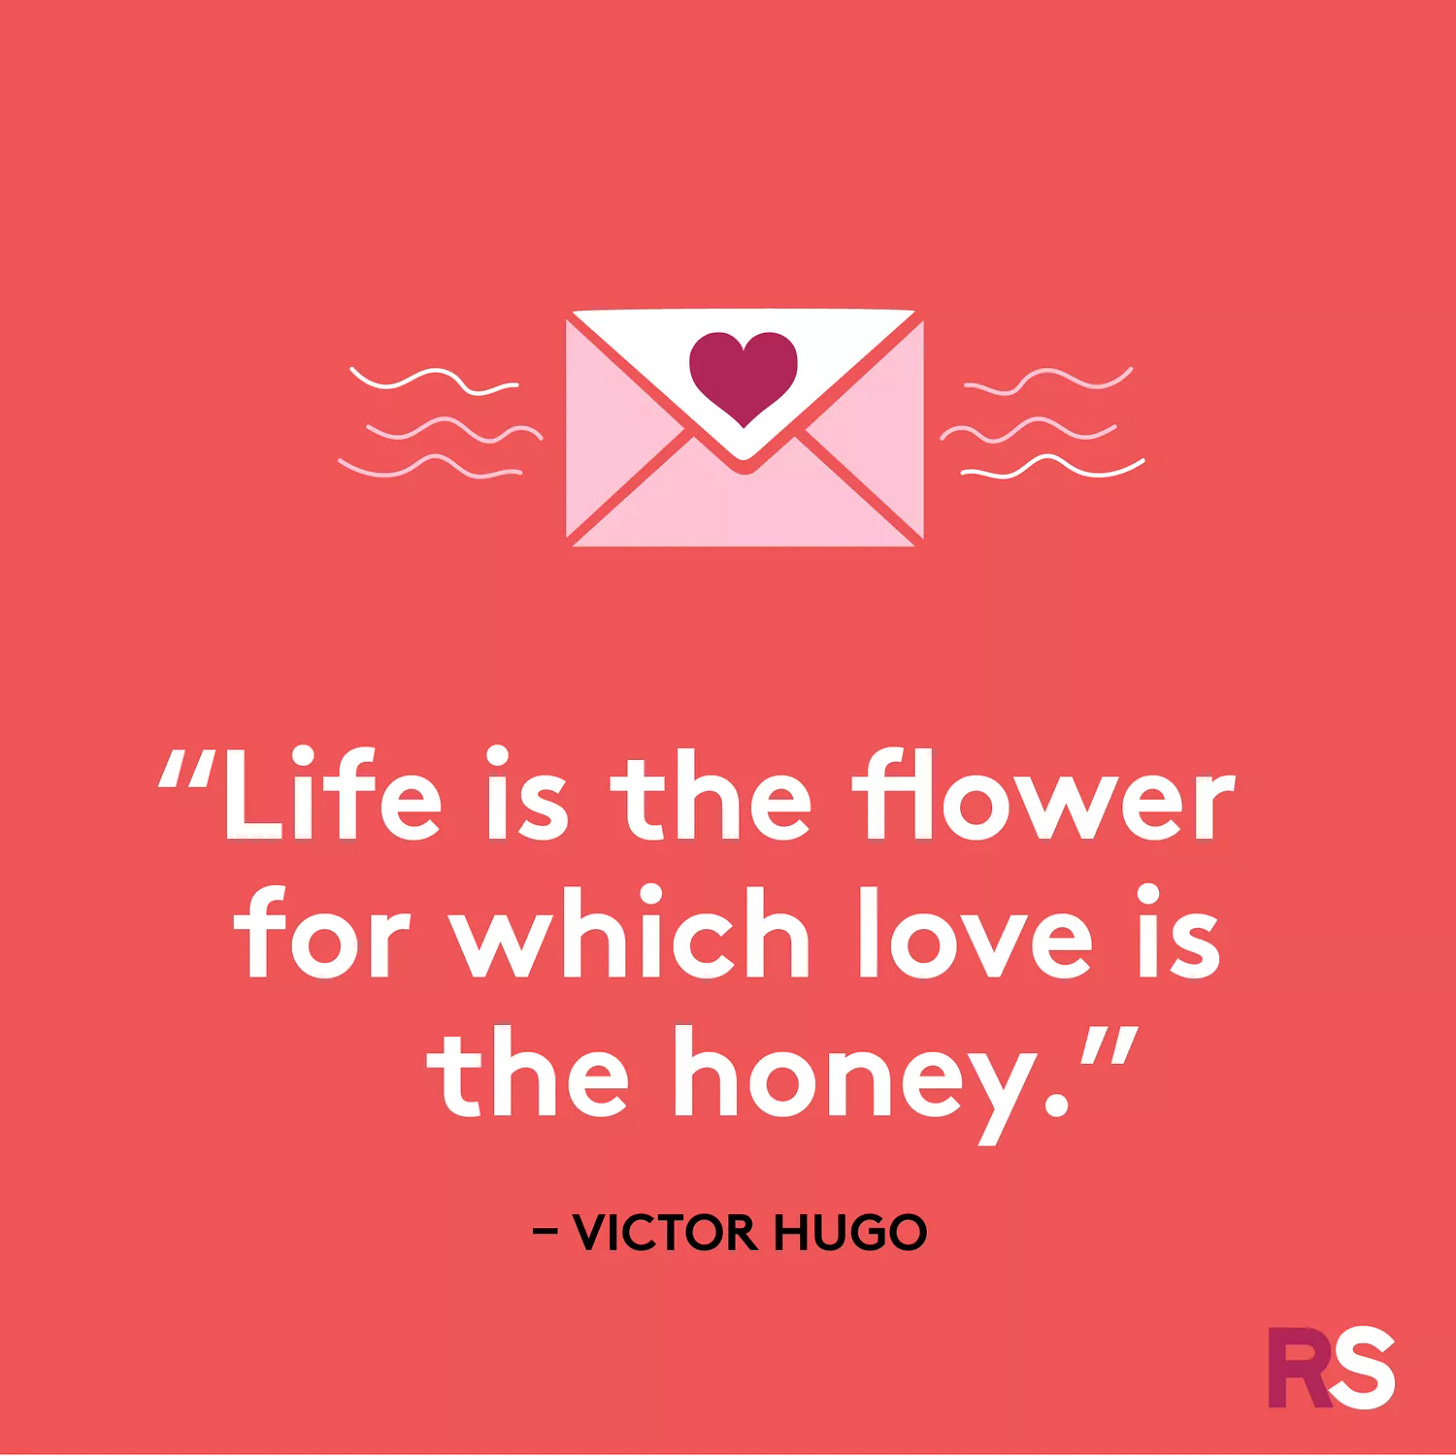 "Life is the flower for which love is the honey.â